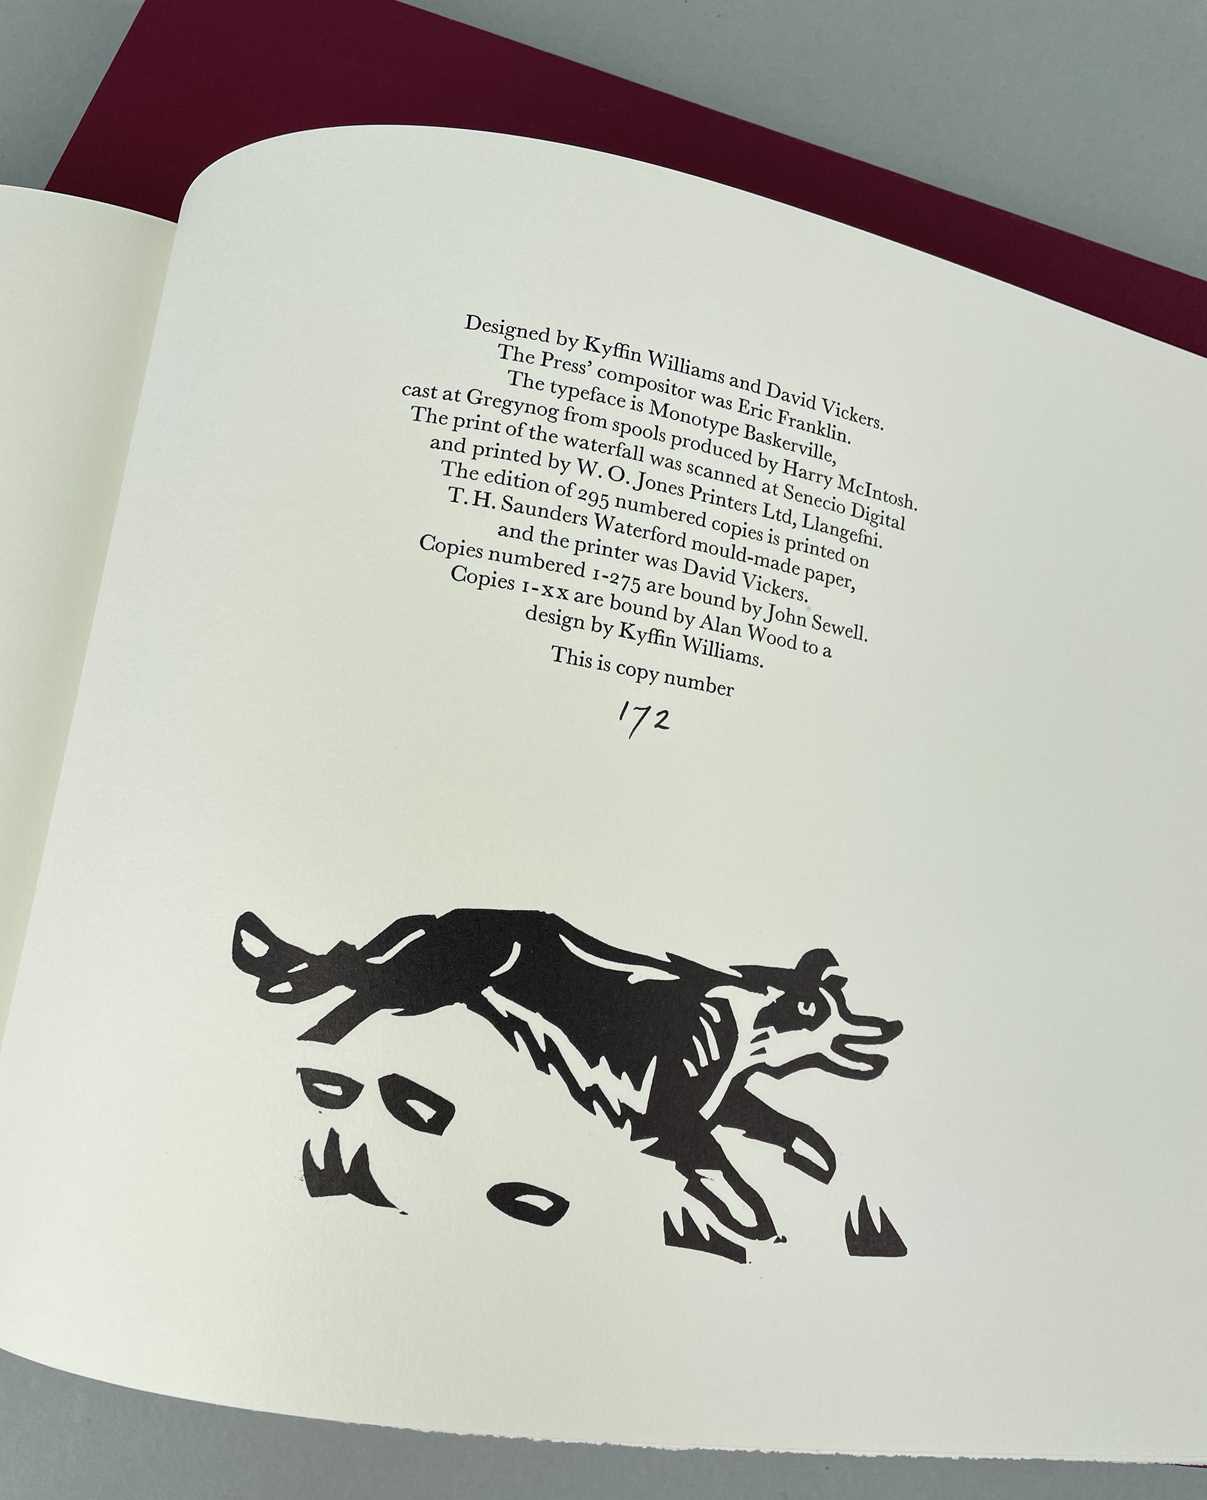 ‡ SIR KYFFIN WILLIAMS RA limited edition (172/275) volume of 'Cutting Images' - printed on T H - Image 5 of 7